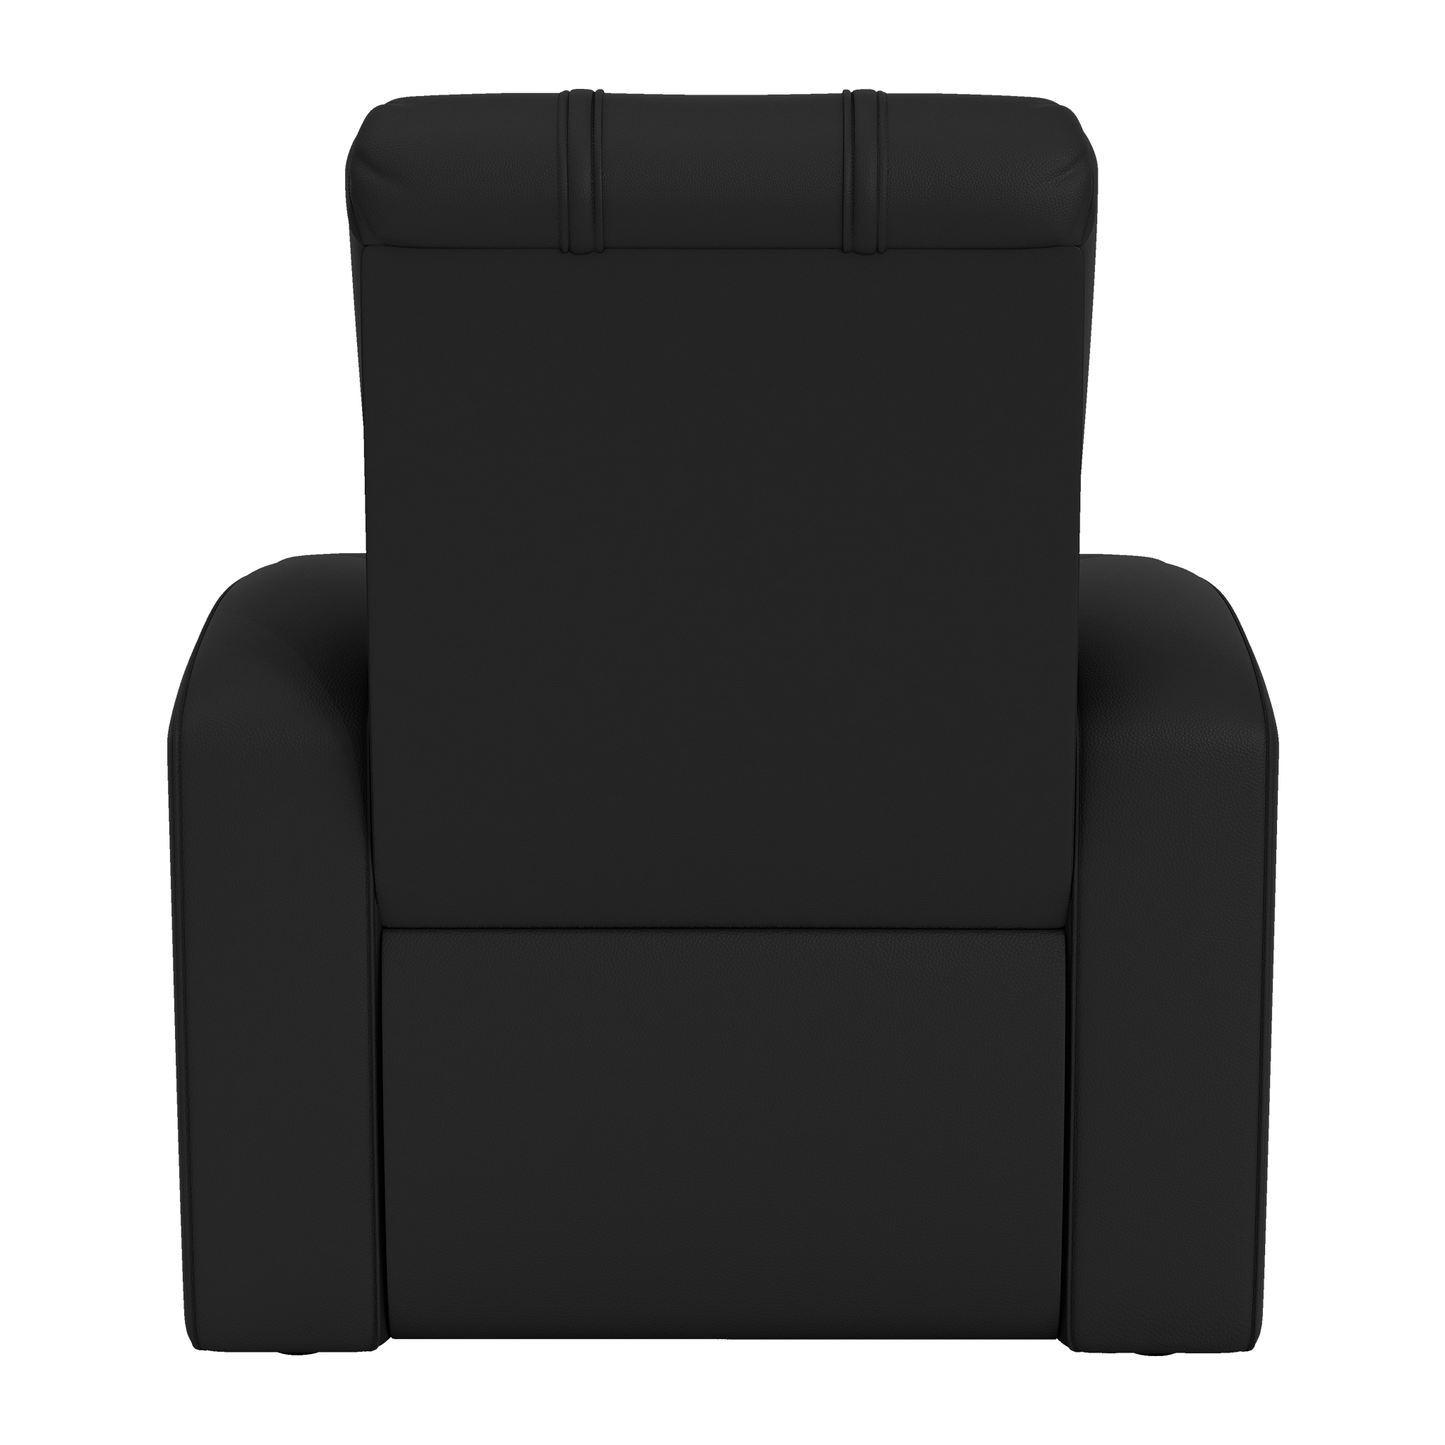 Relax Home Theater Recliner with Boston Red Sox 2018 Champions Logo